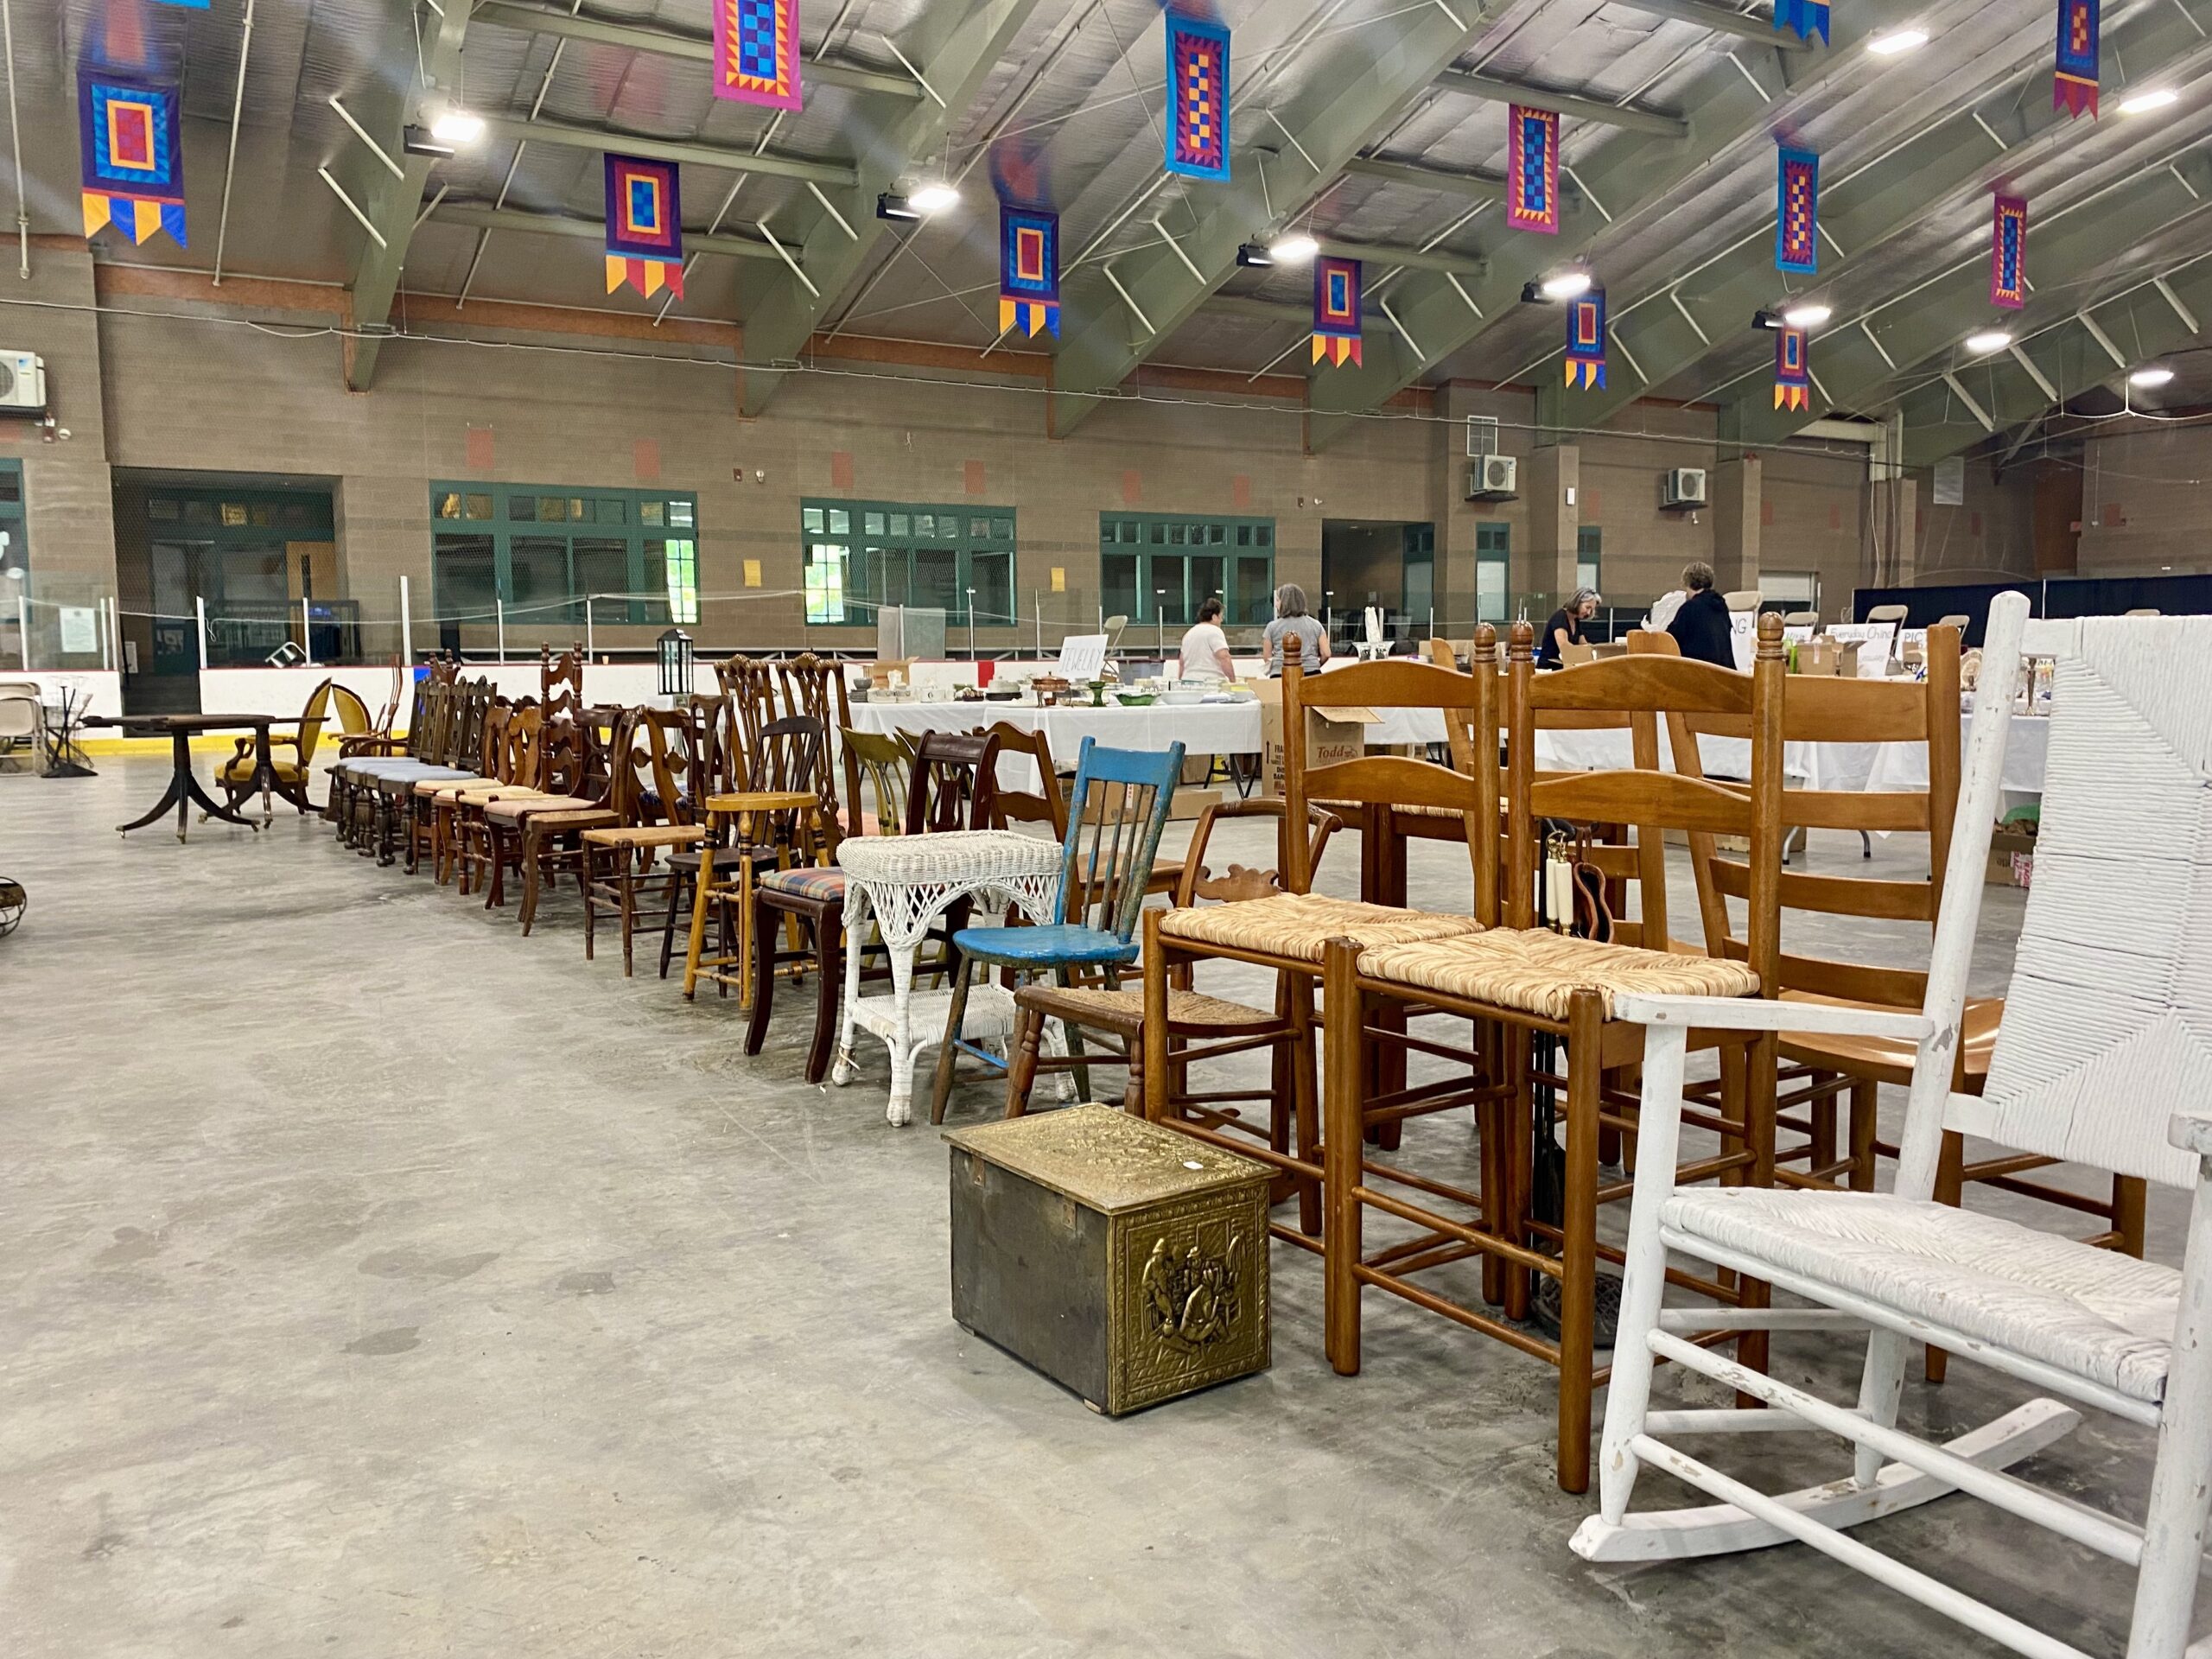 Annual Barn Sale kicks off September 16-17 at Northshire Civic Center